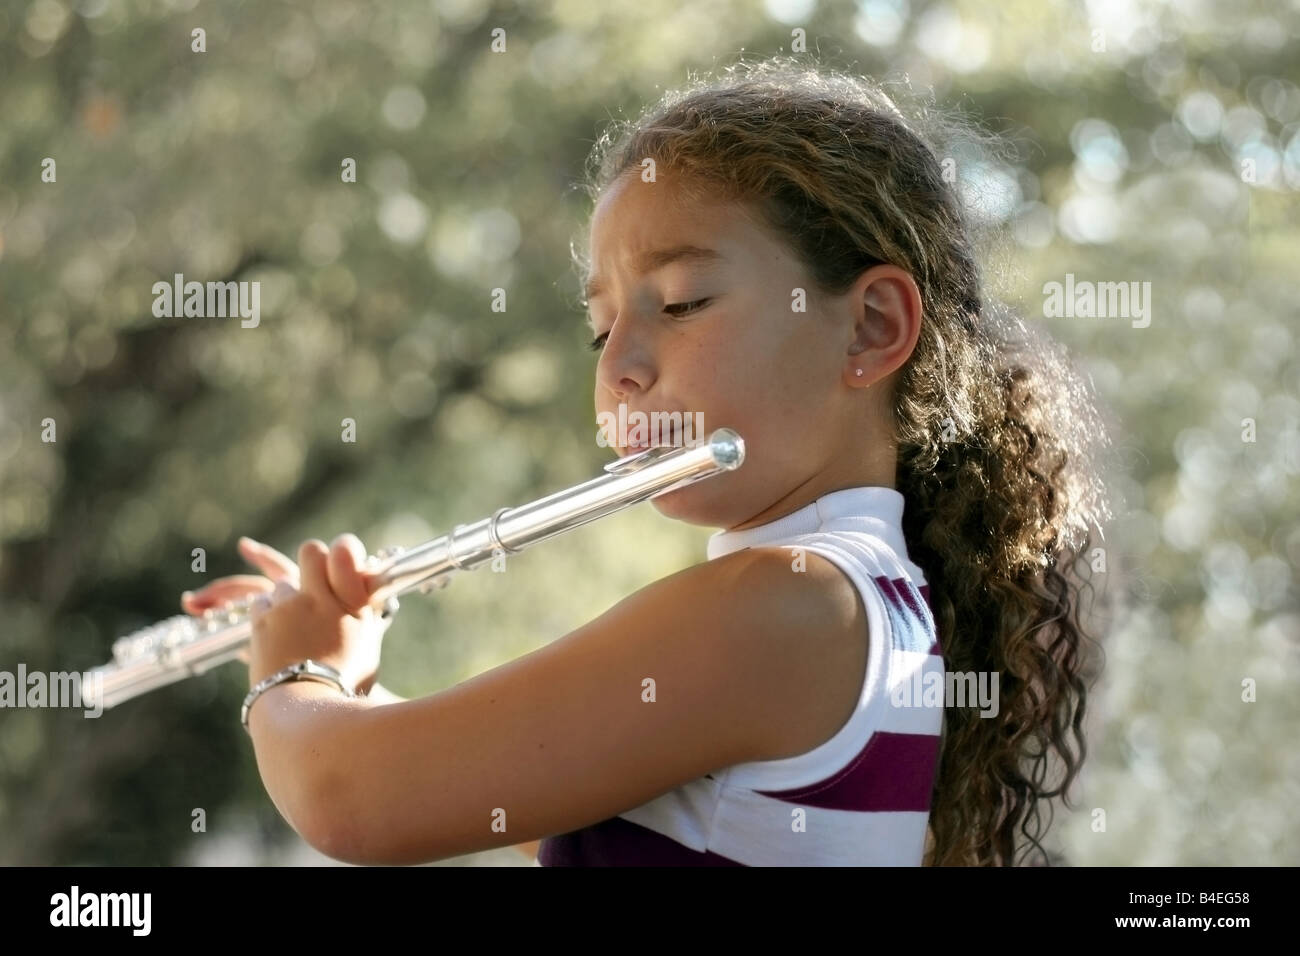 Girl playing a flute Stock Photo